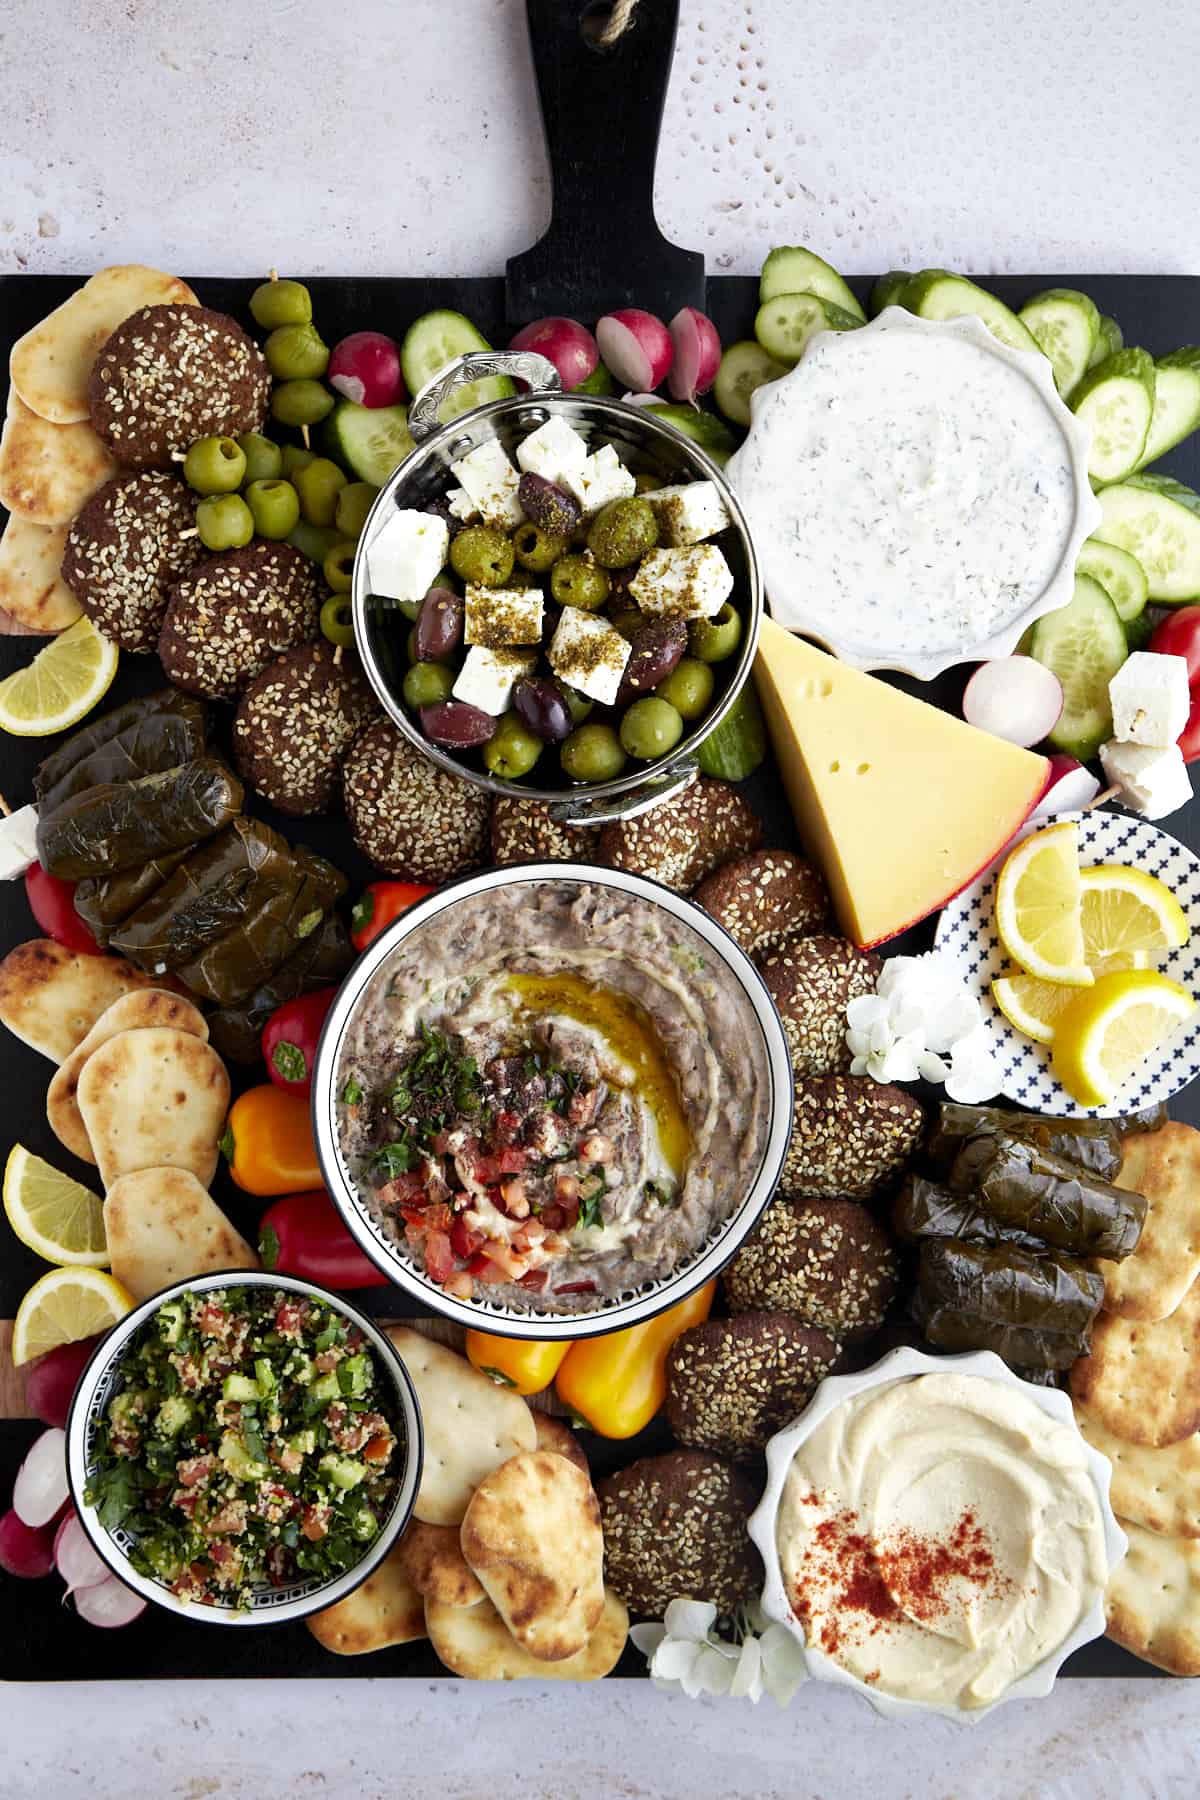 Overhead image of a mezze platter with dips and spreads, cheese, fresh veggies, pita, falafel, and stuffed grape leaves. 